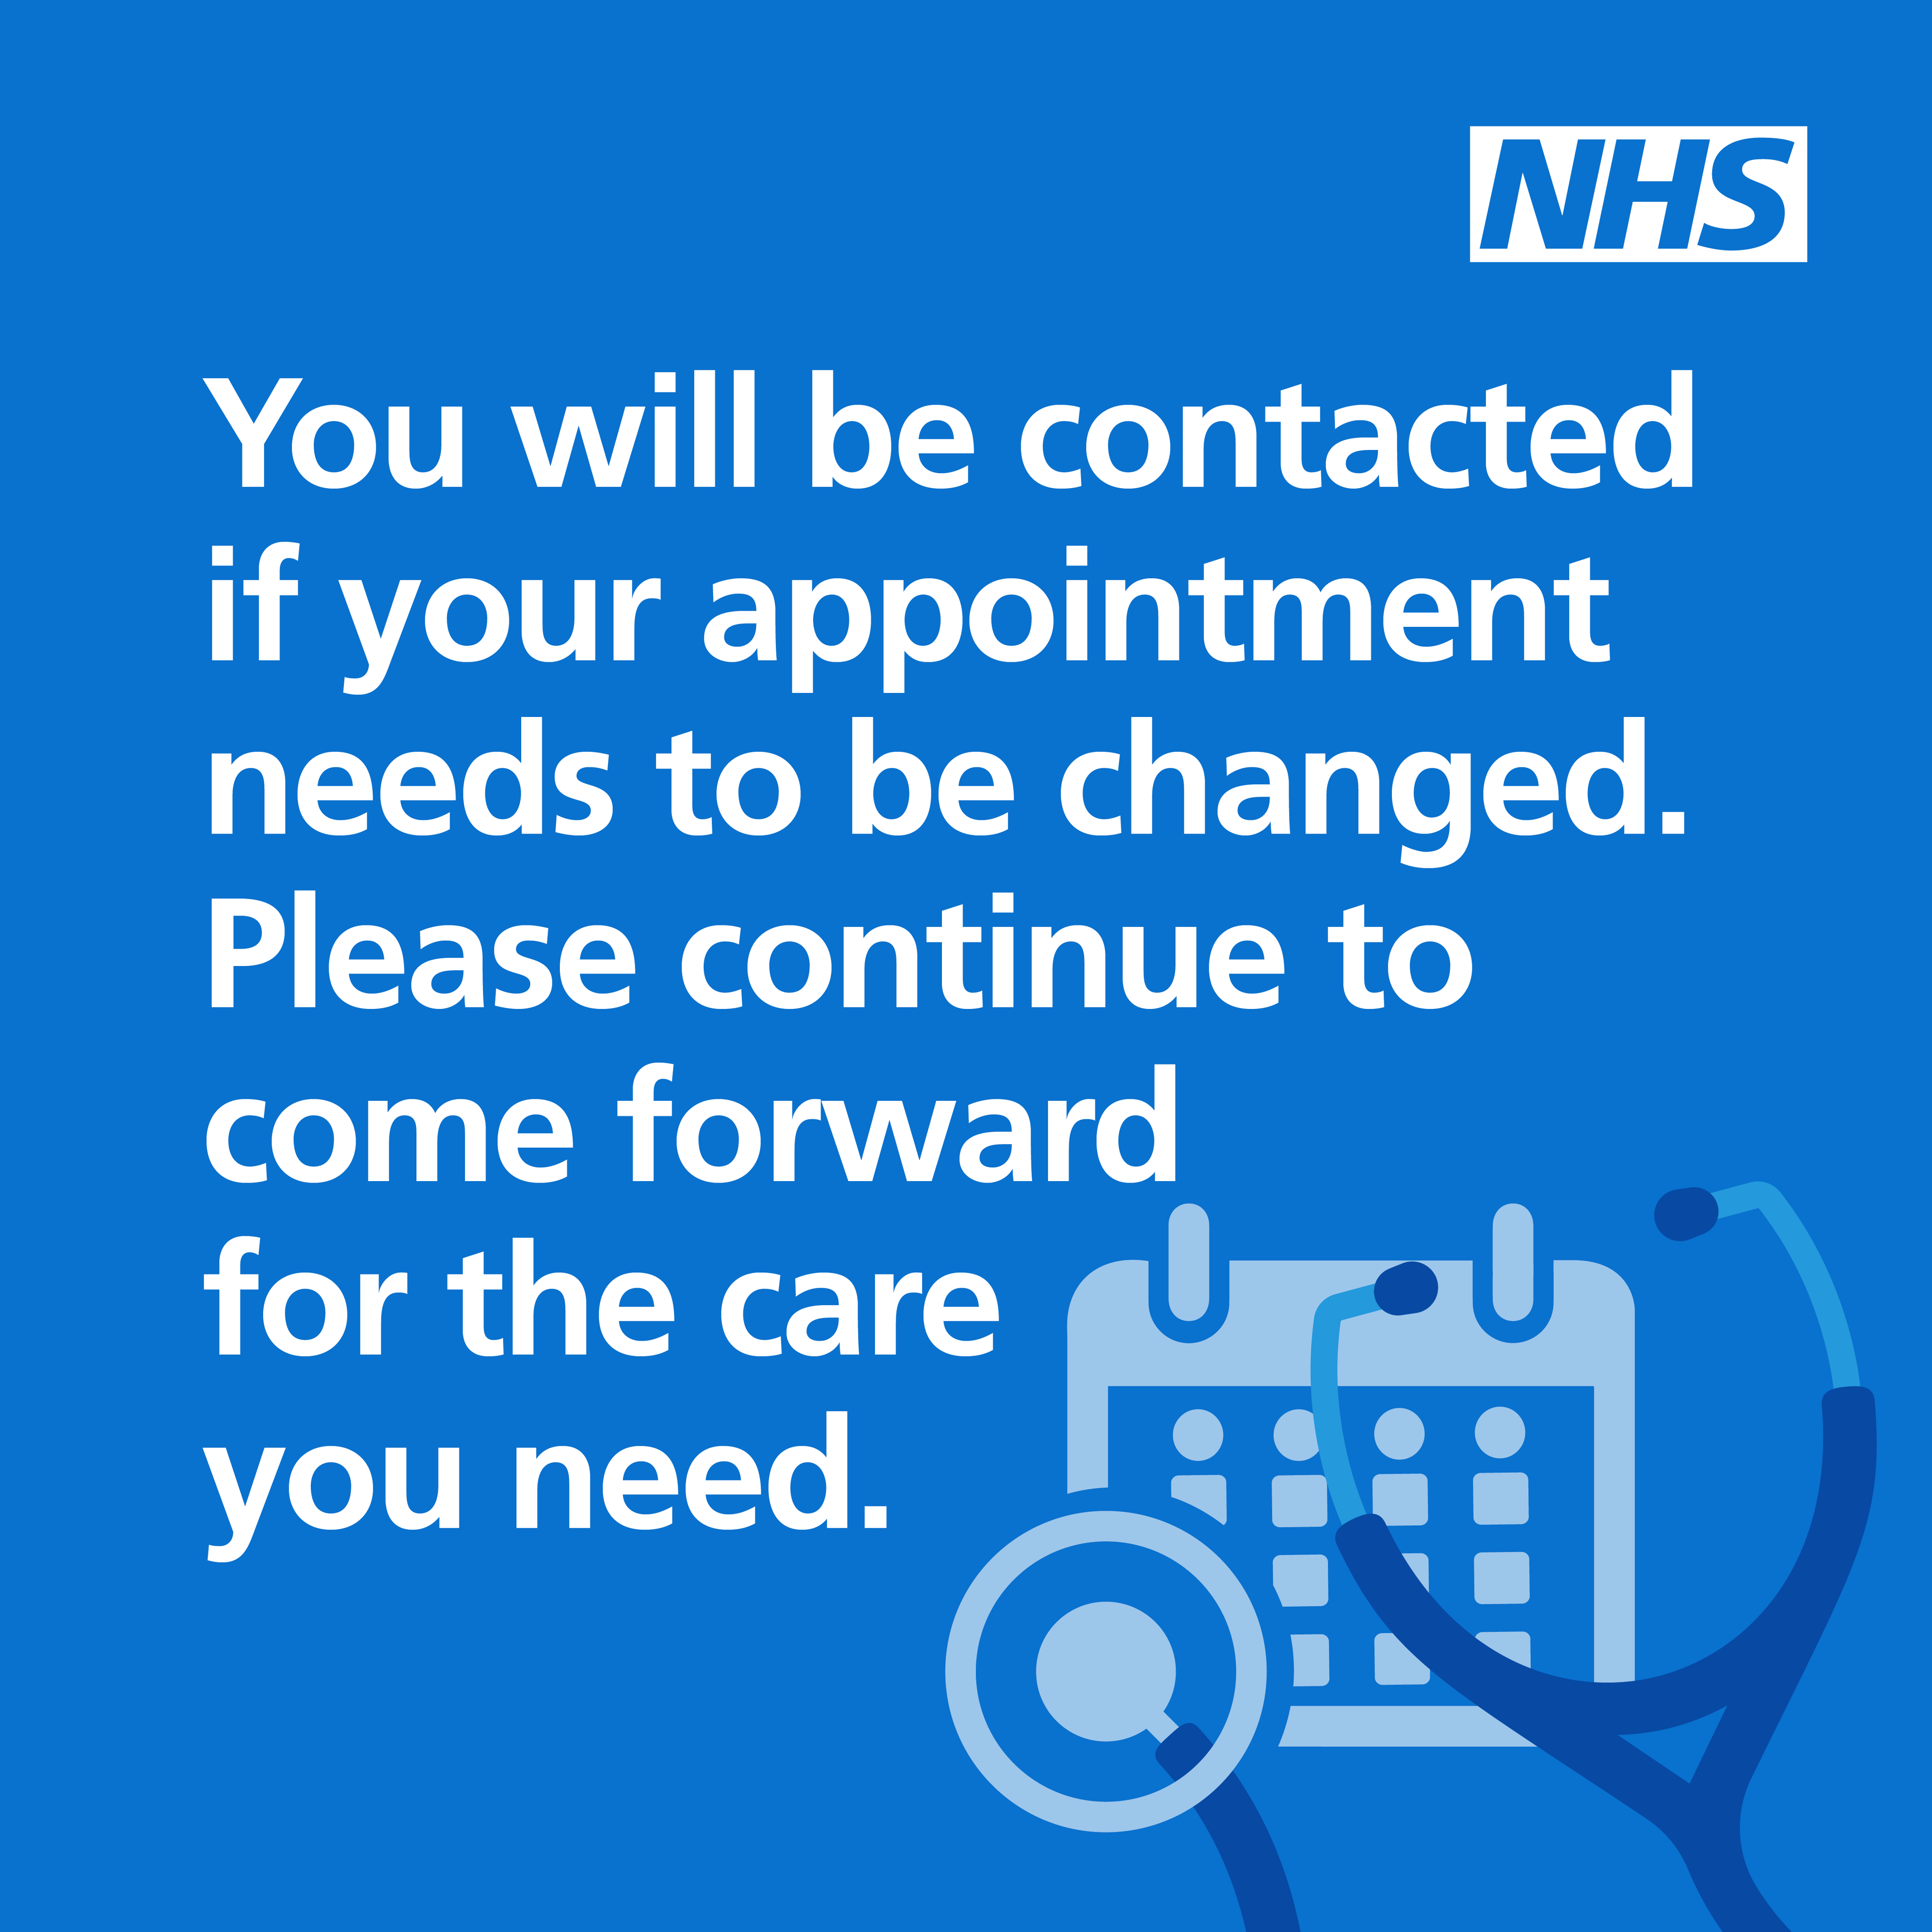 Image advising patients to attend appointments unless contacted by the Trust